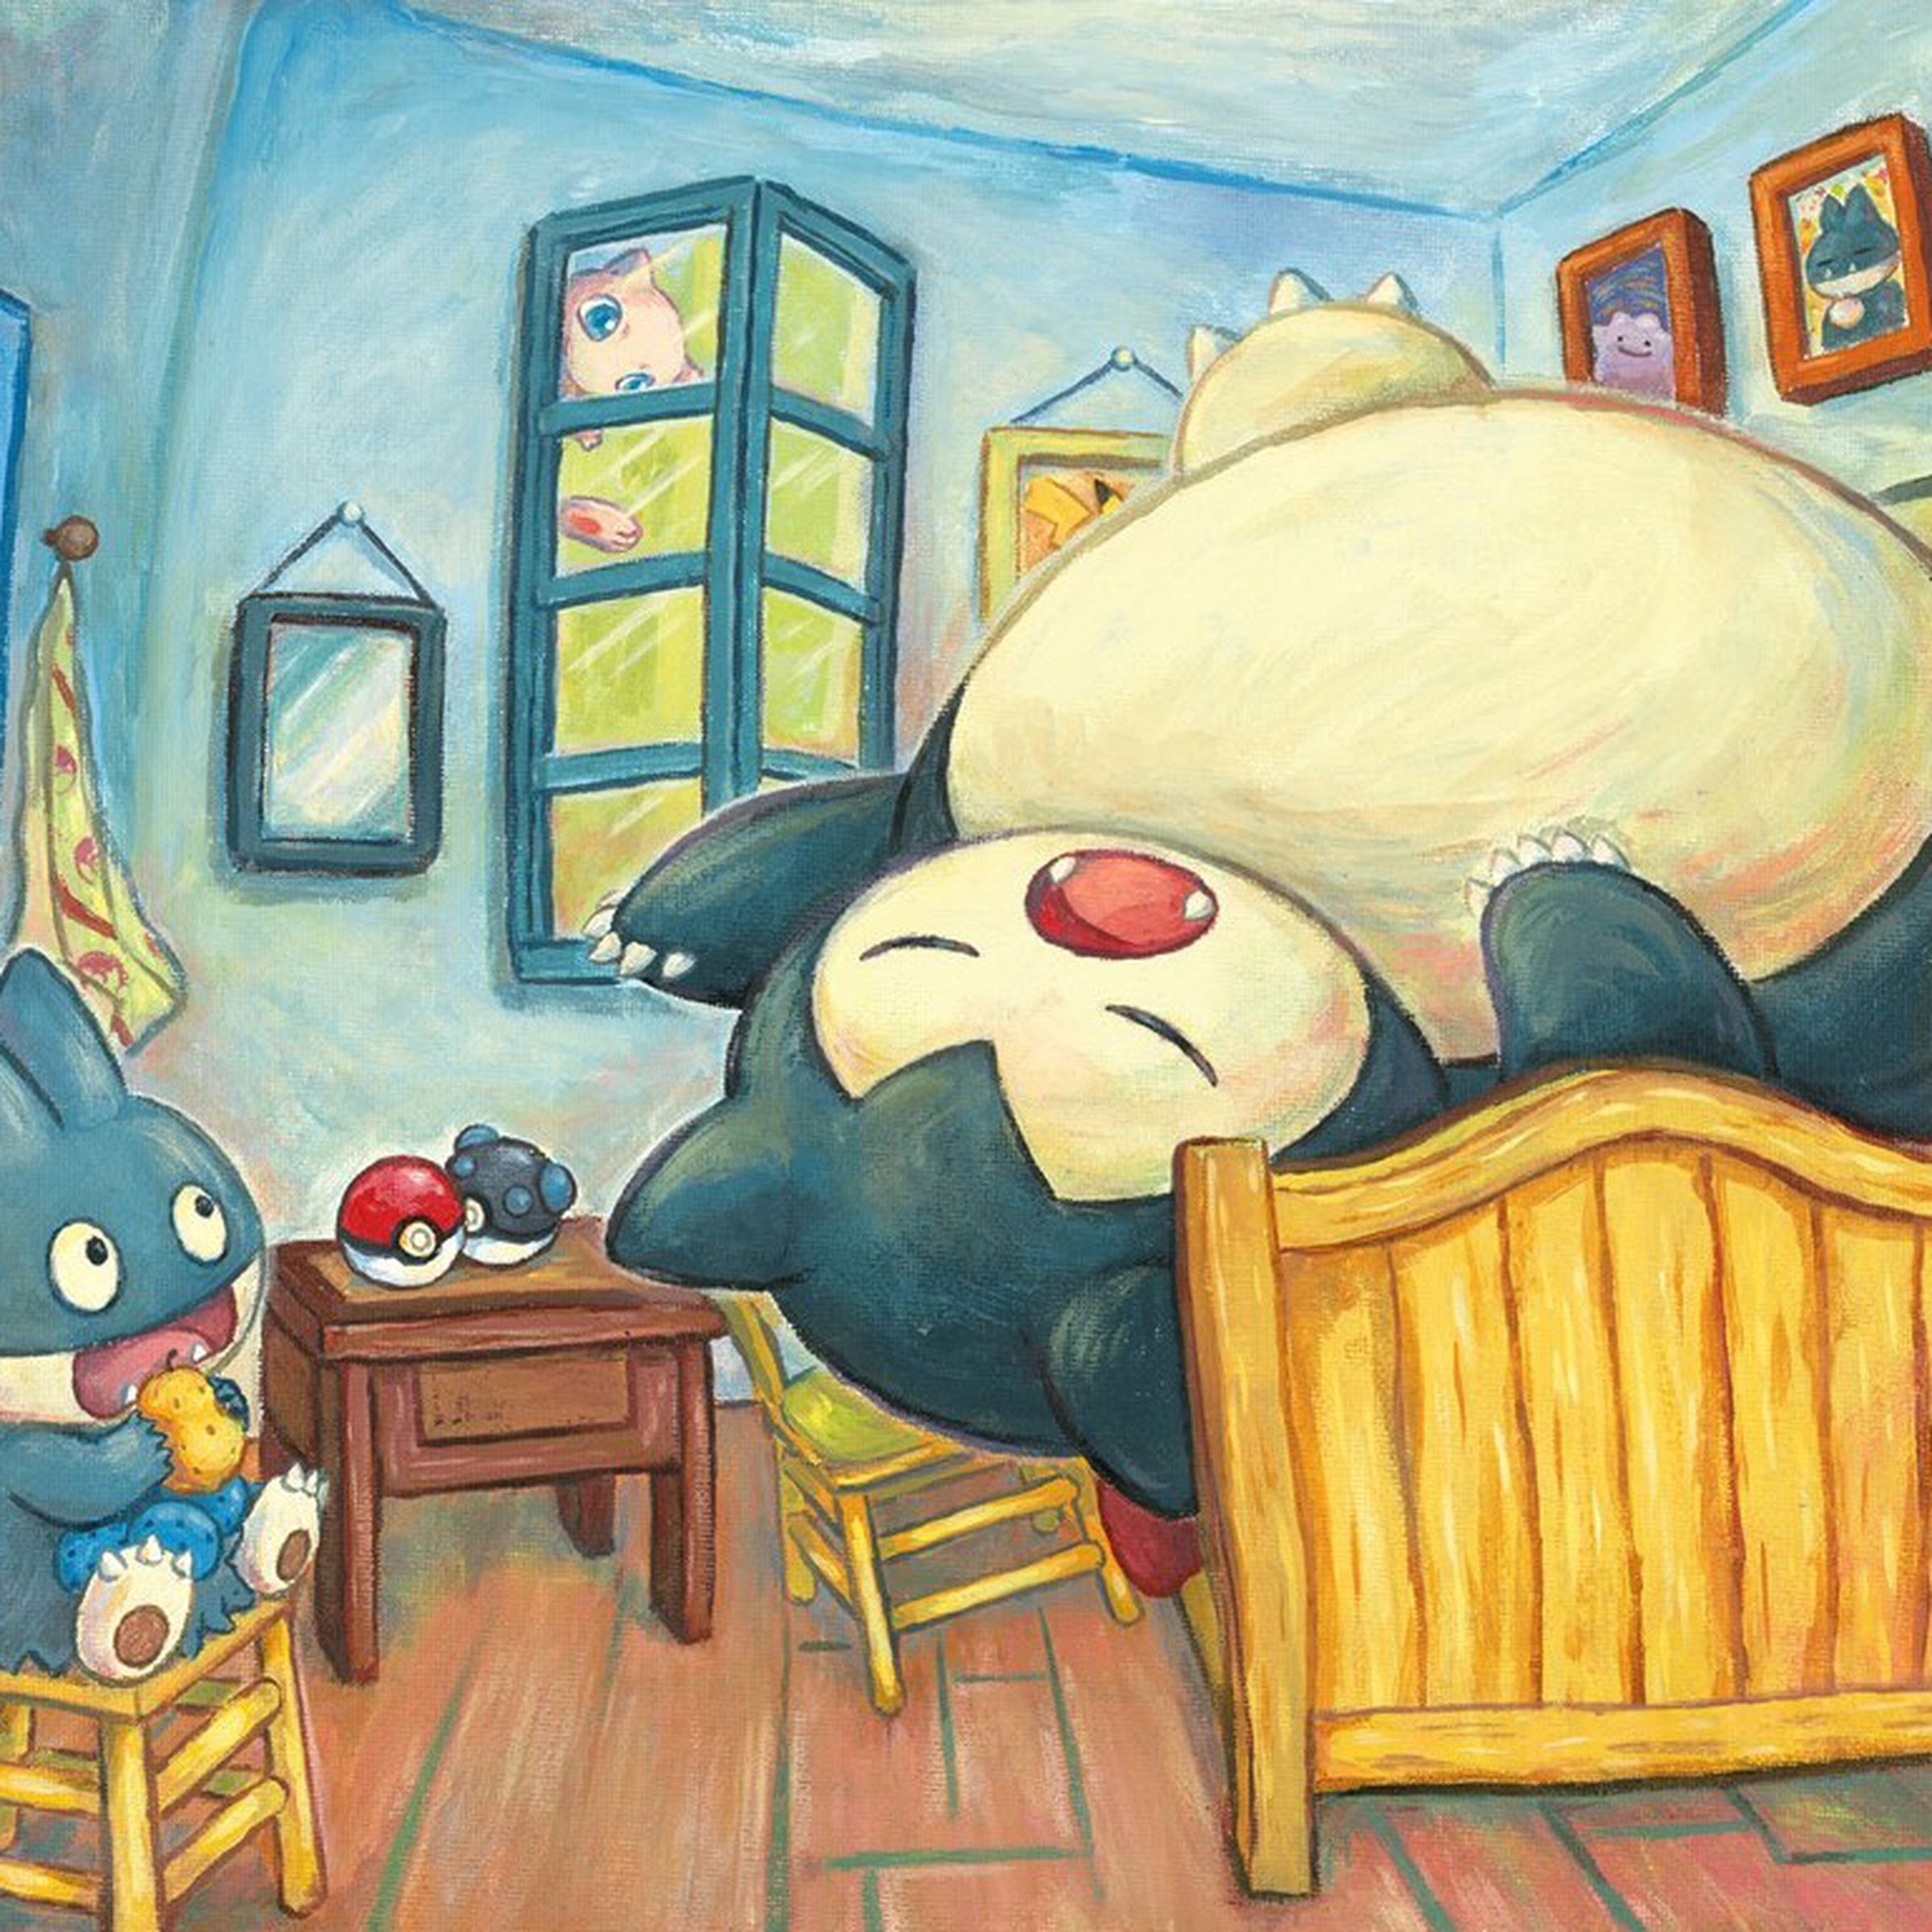 A painting of two bear-like creatures — one small one sitting in a chair eating fruit, and the other is much larger and sleeping in a bed — in a cramped room.